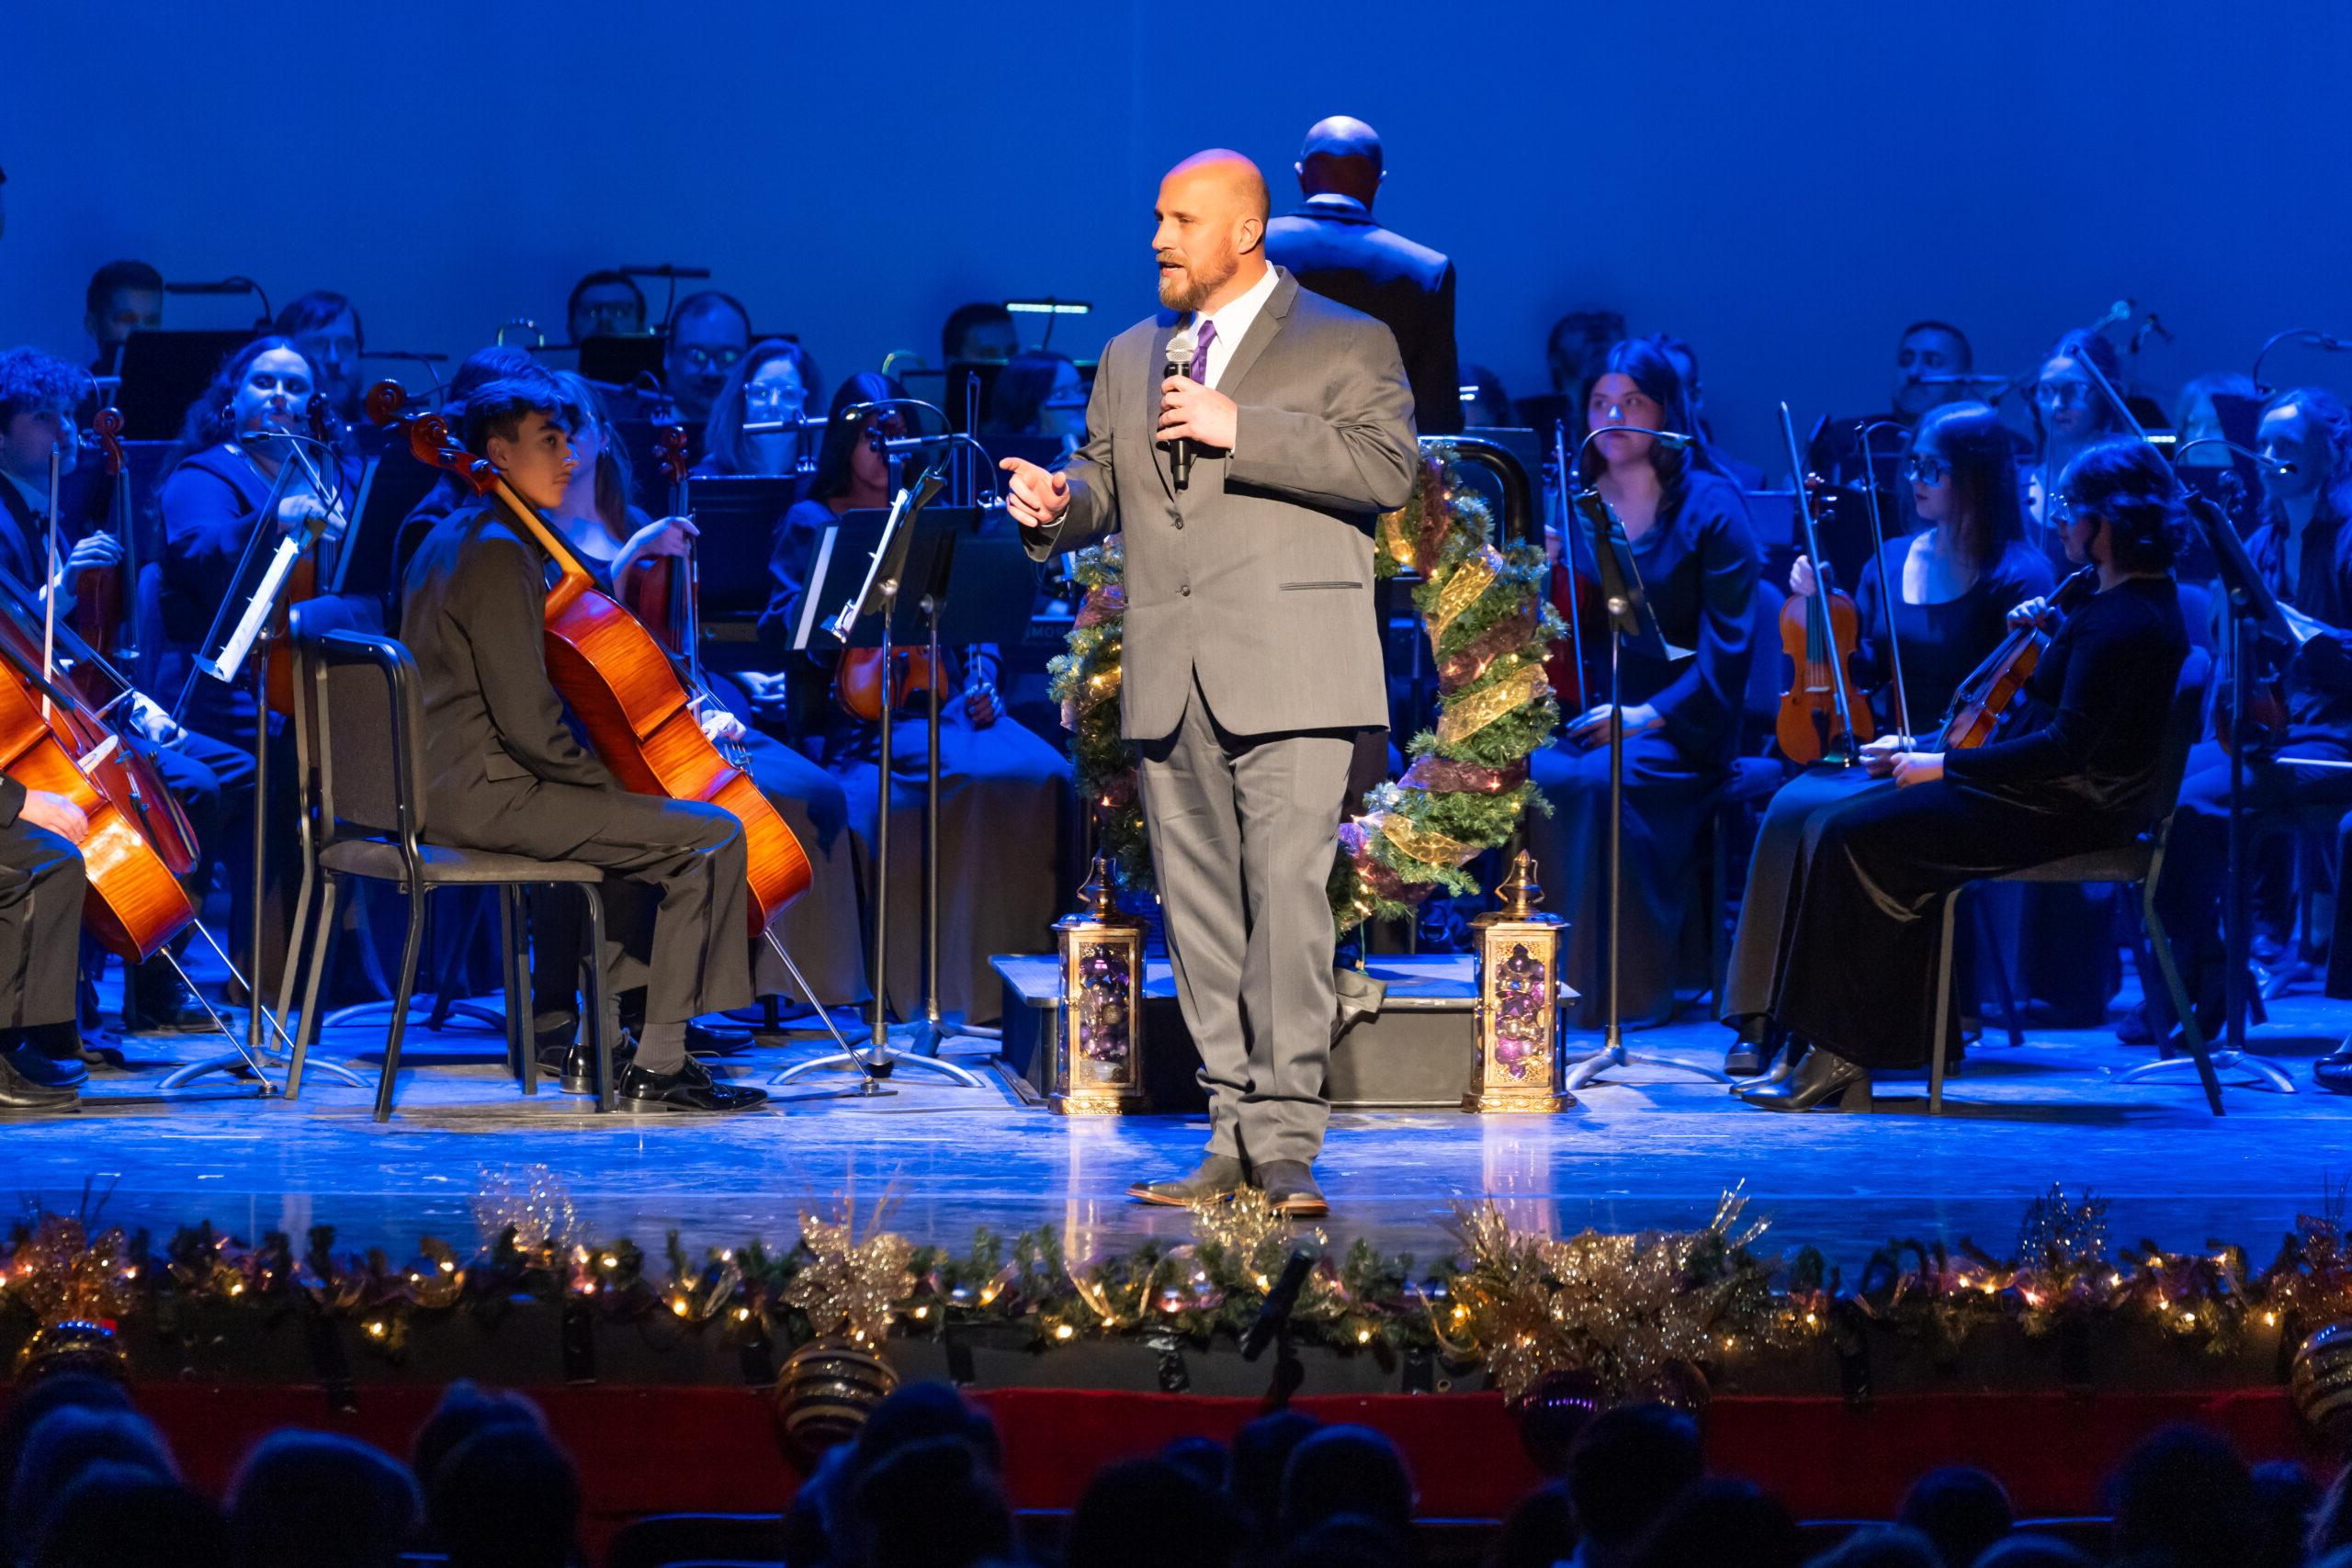 Man speaking on stage during Christmas concert